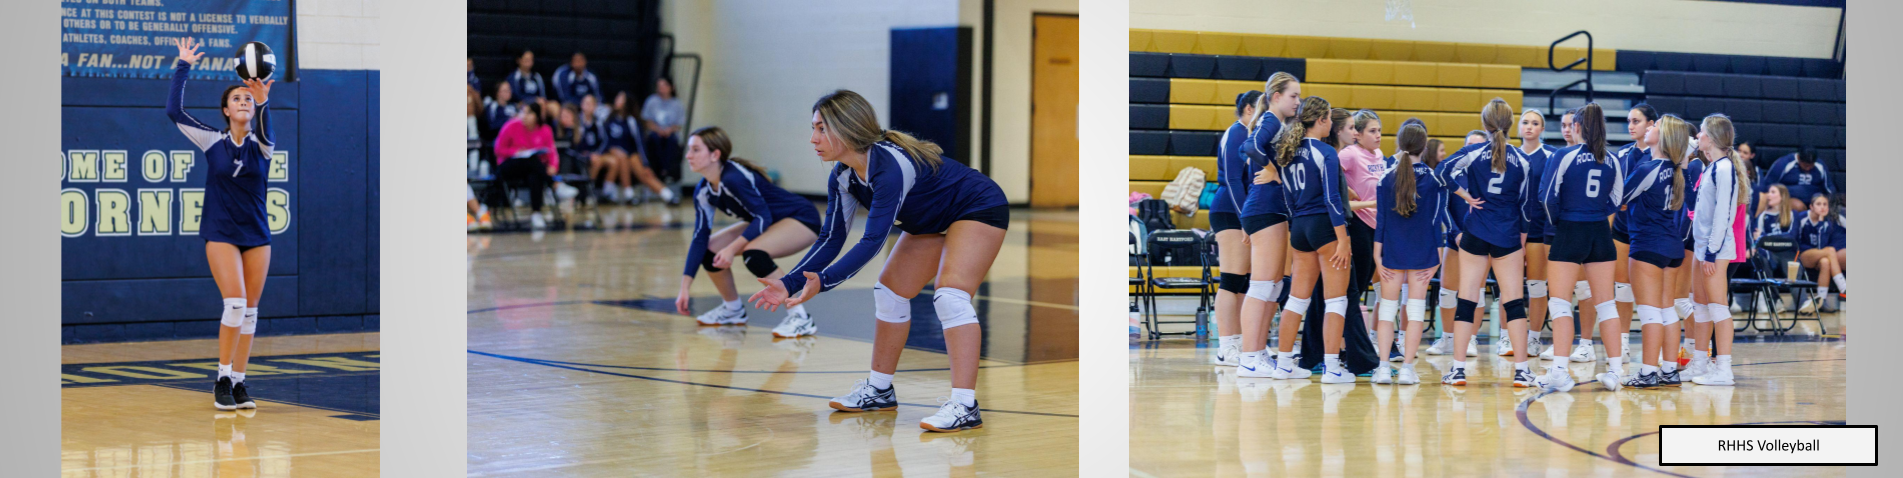 Members of the volleyball team in action